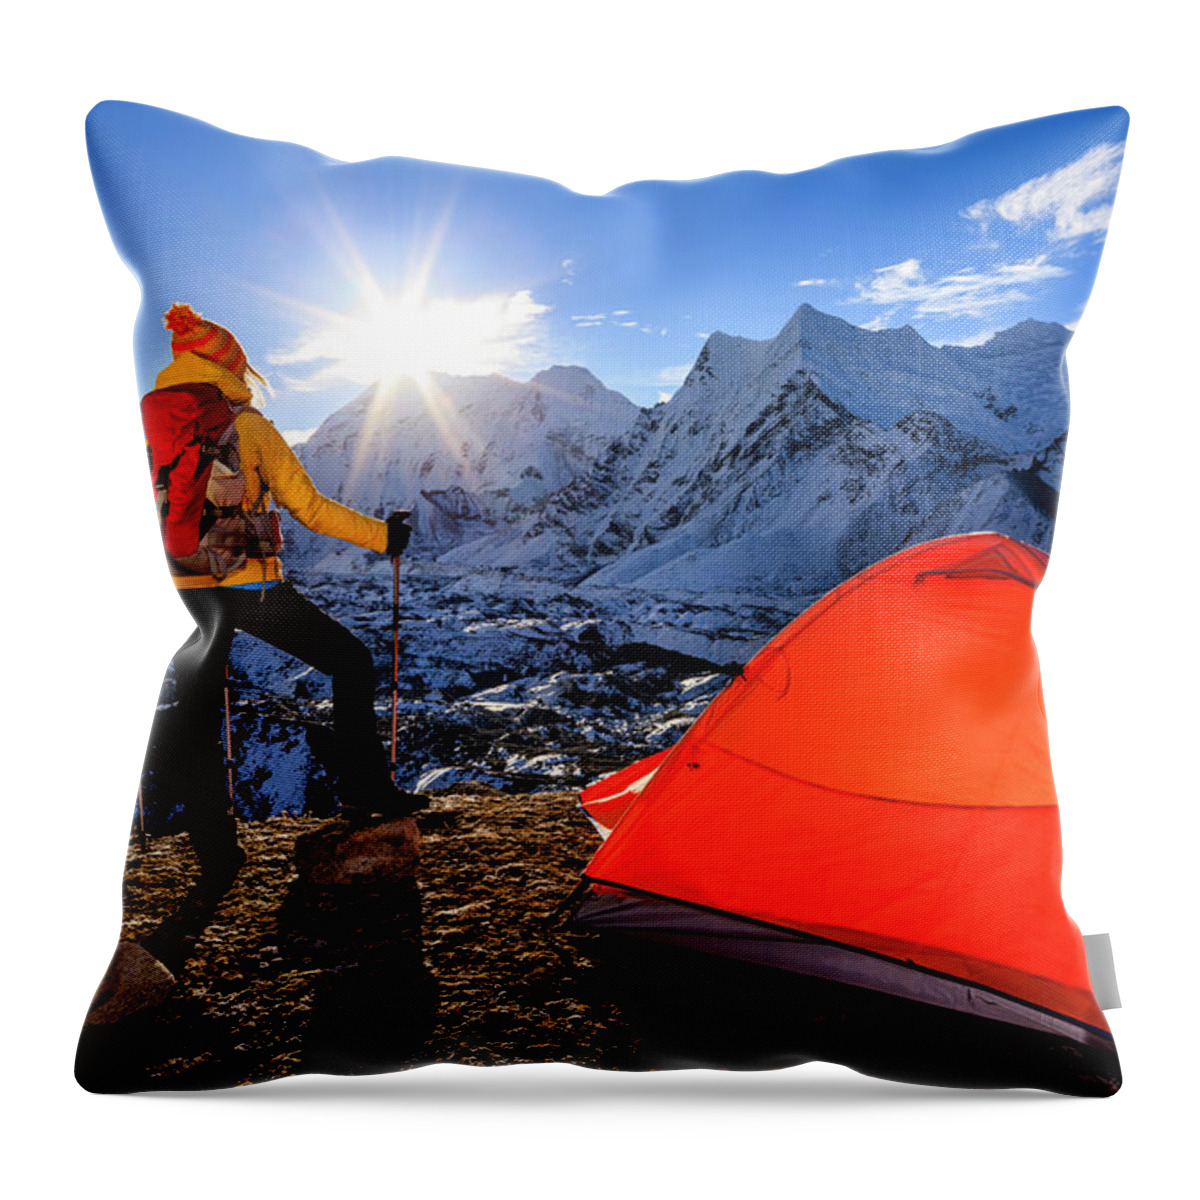 Tranquility Throw Pillow featuring the photograph Women Watching Sunrise In Himalayas by Bartosz Hadyniak